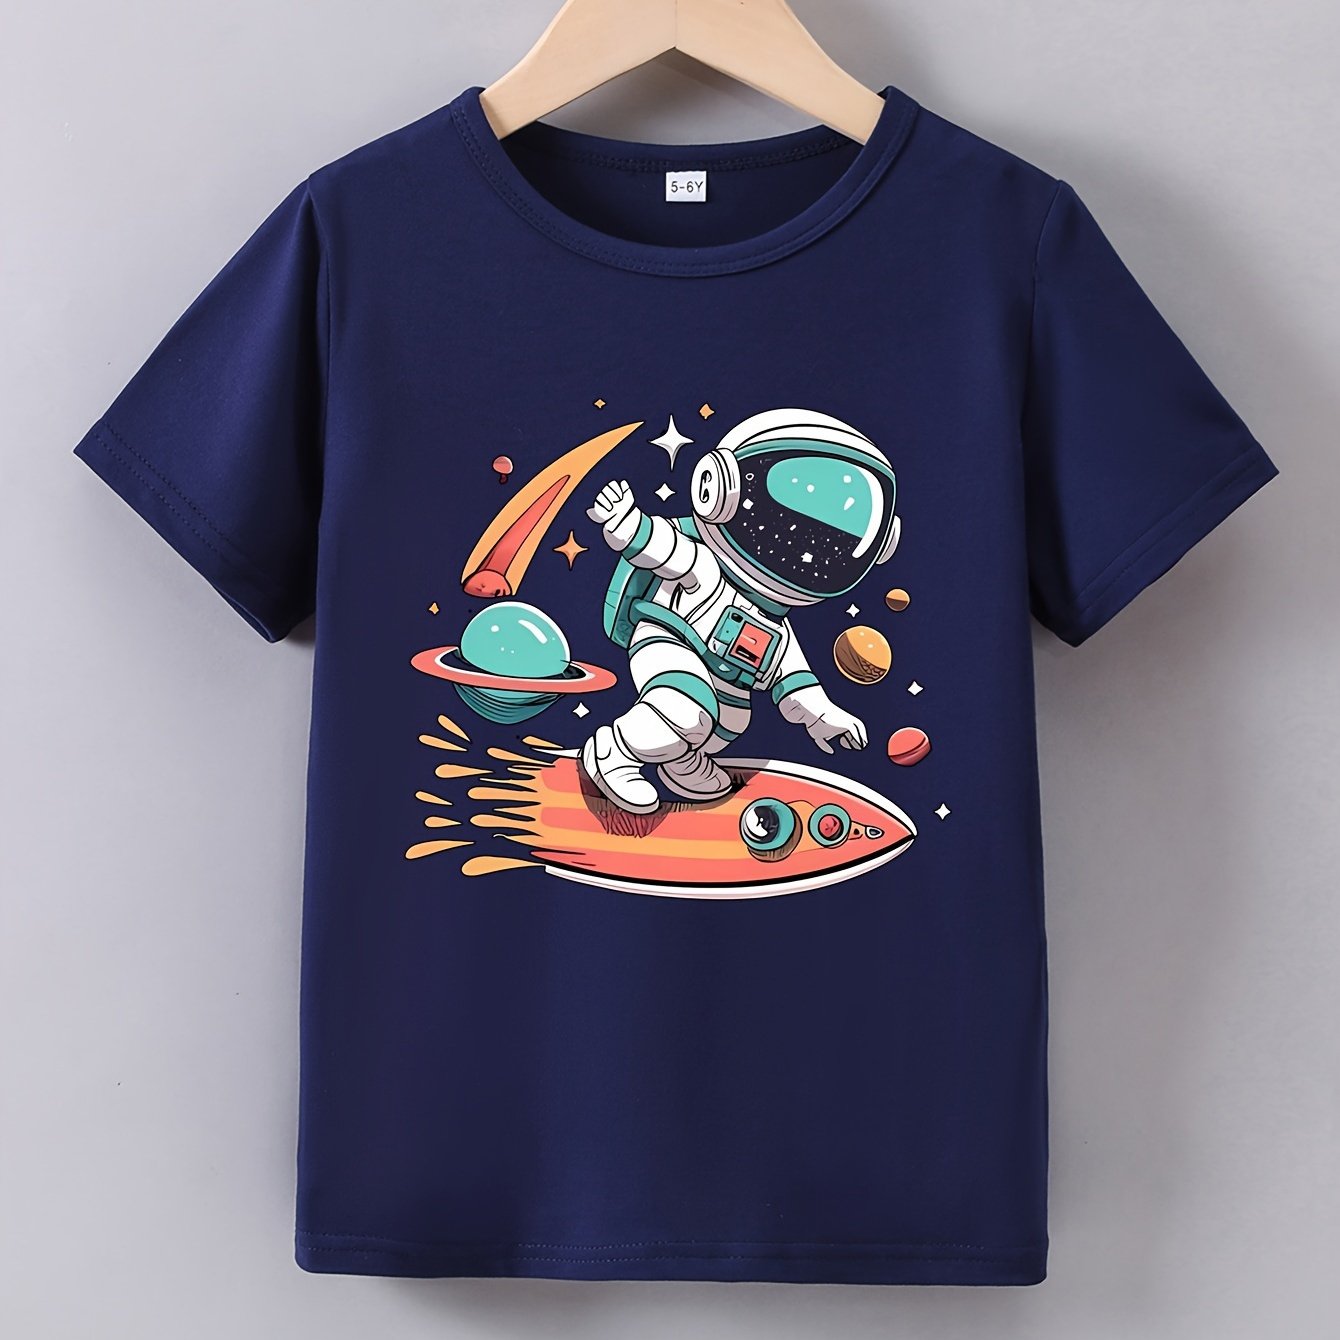 

Astronaut Rocket Print Crew Neck T-shirt For Boys, Casual Short Sleeve Top, Boy's Clothing For Summer Daily Wear